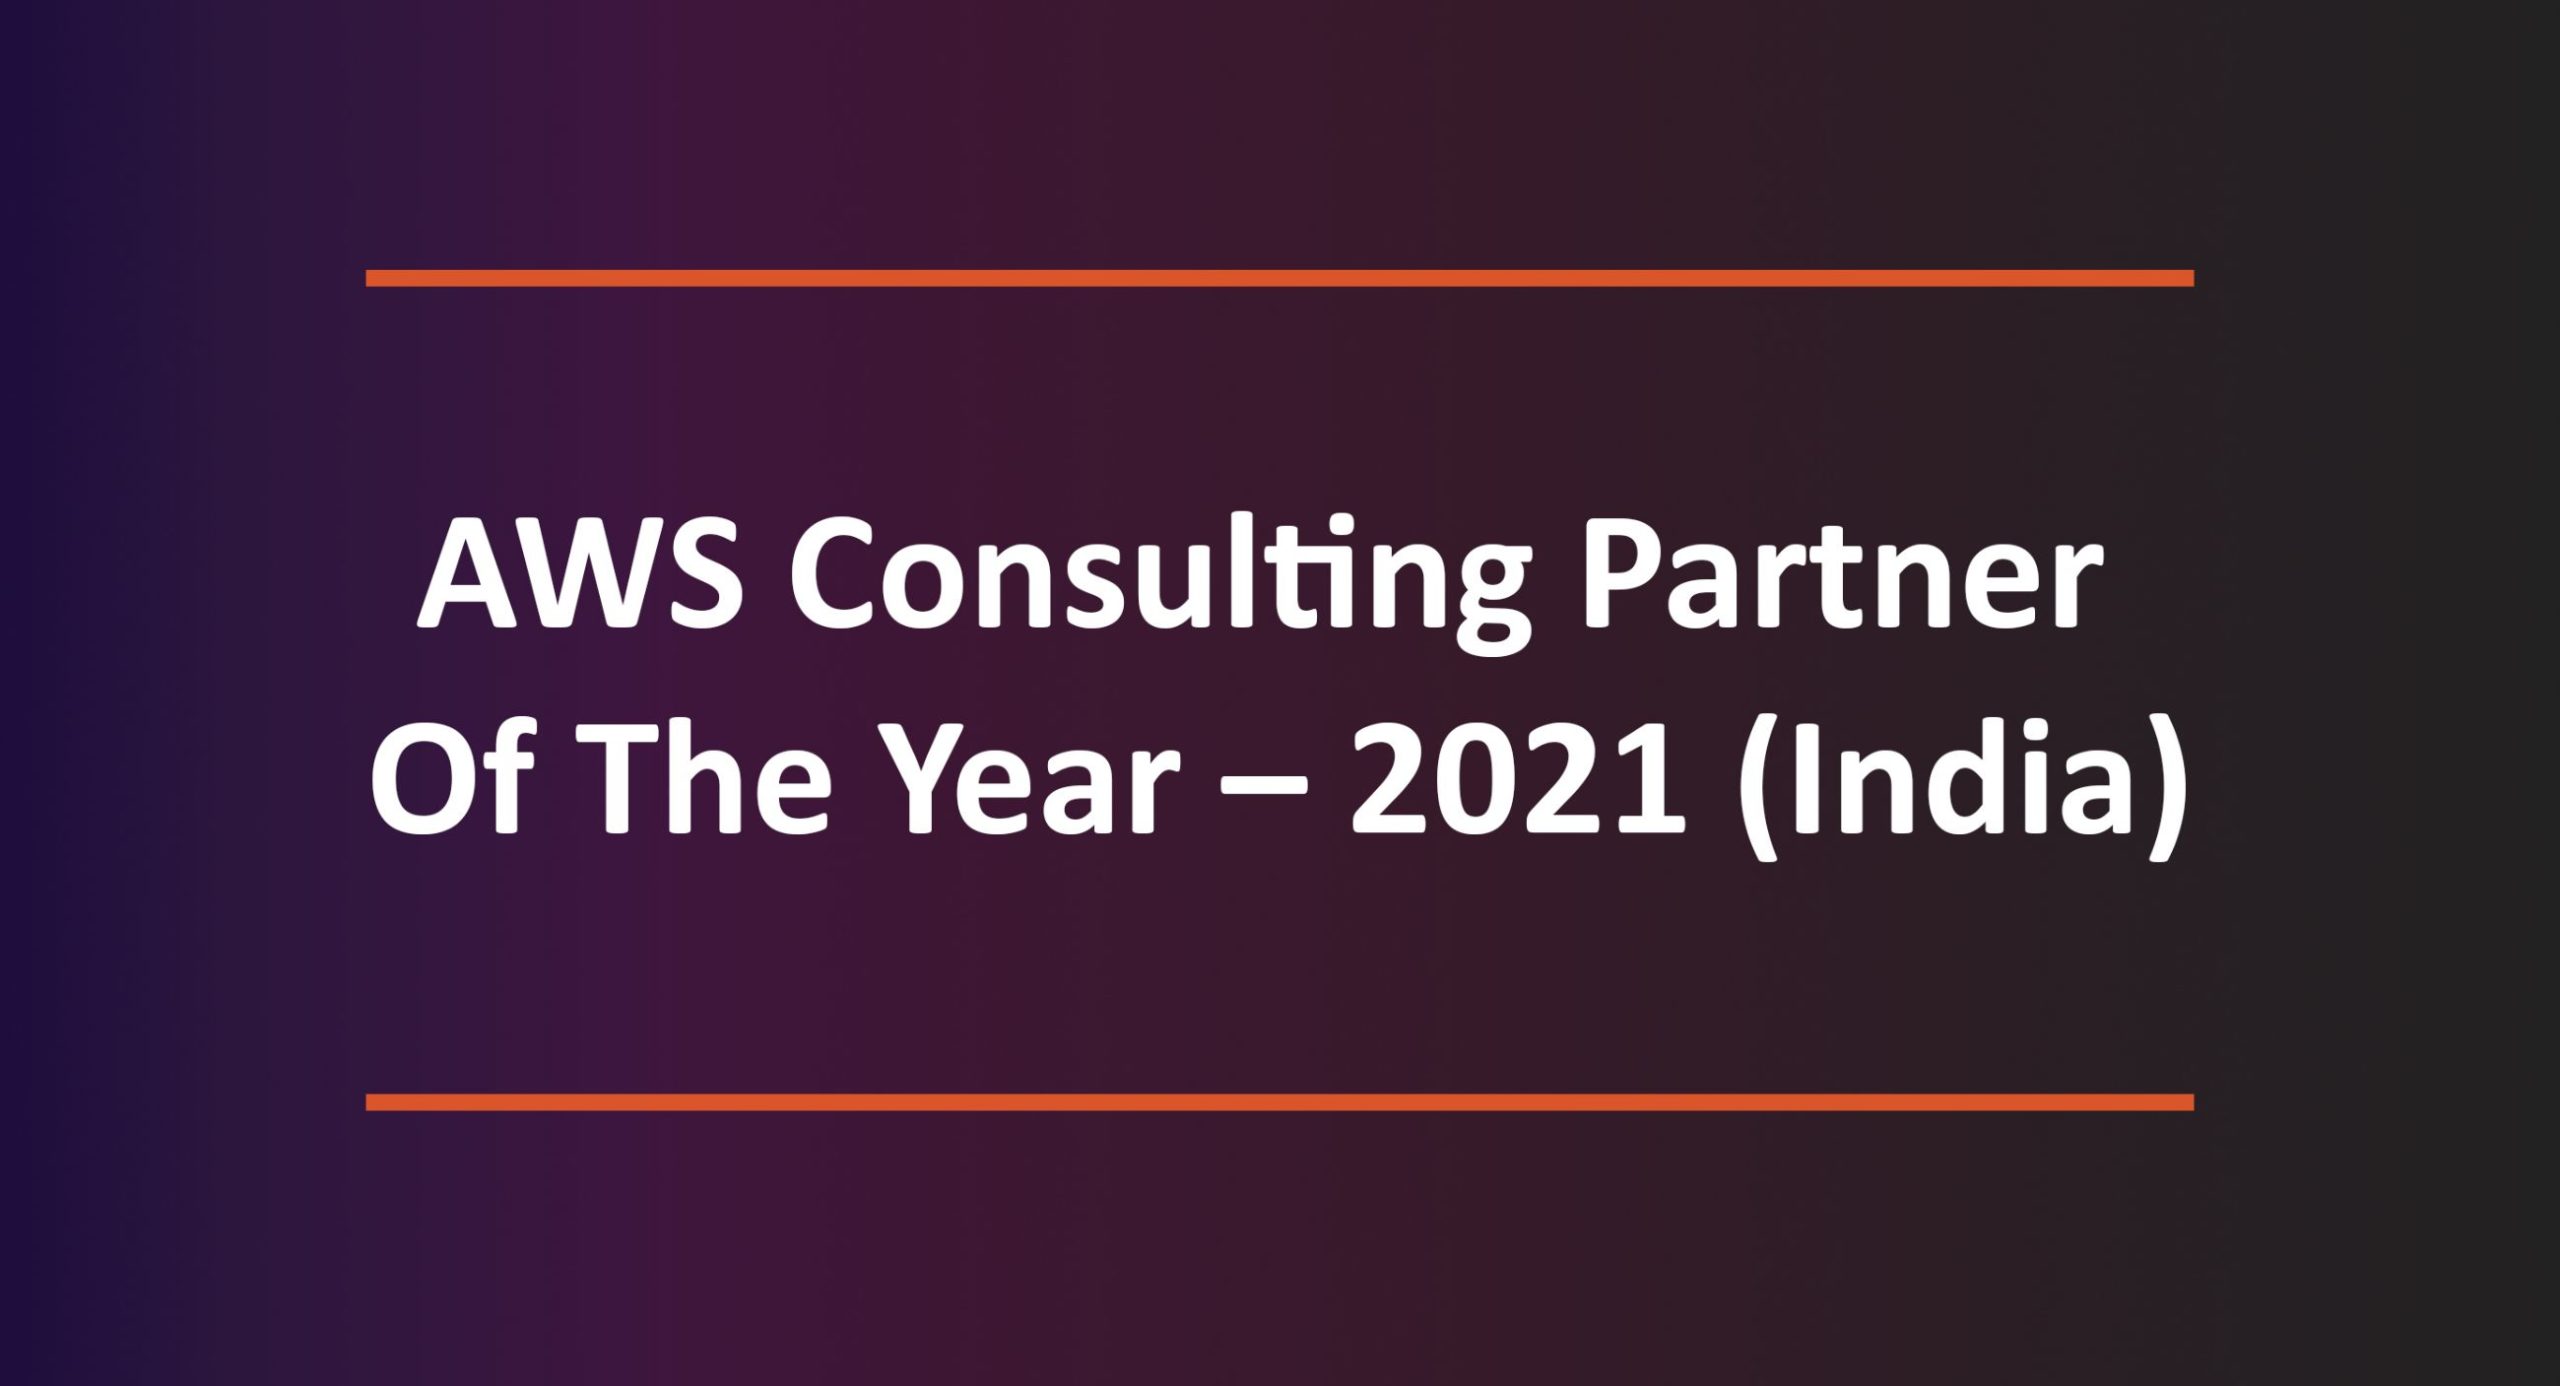 AWS consulting partner of the year-2021